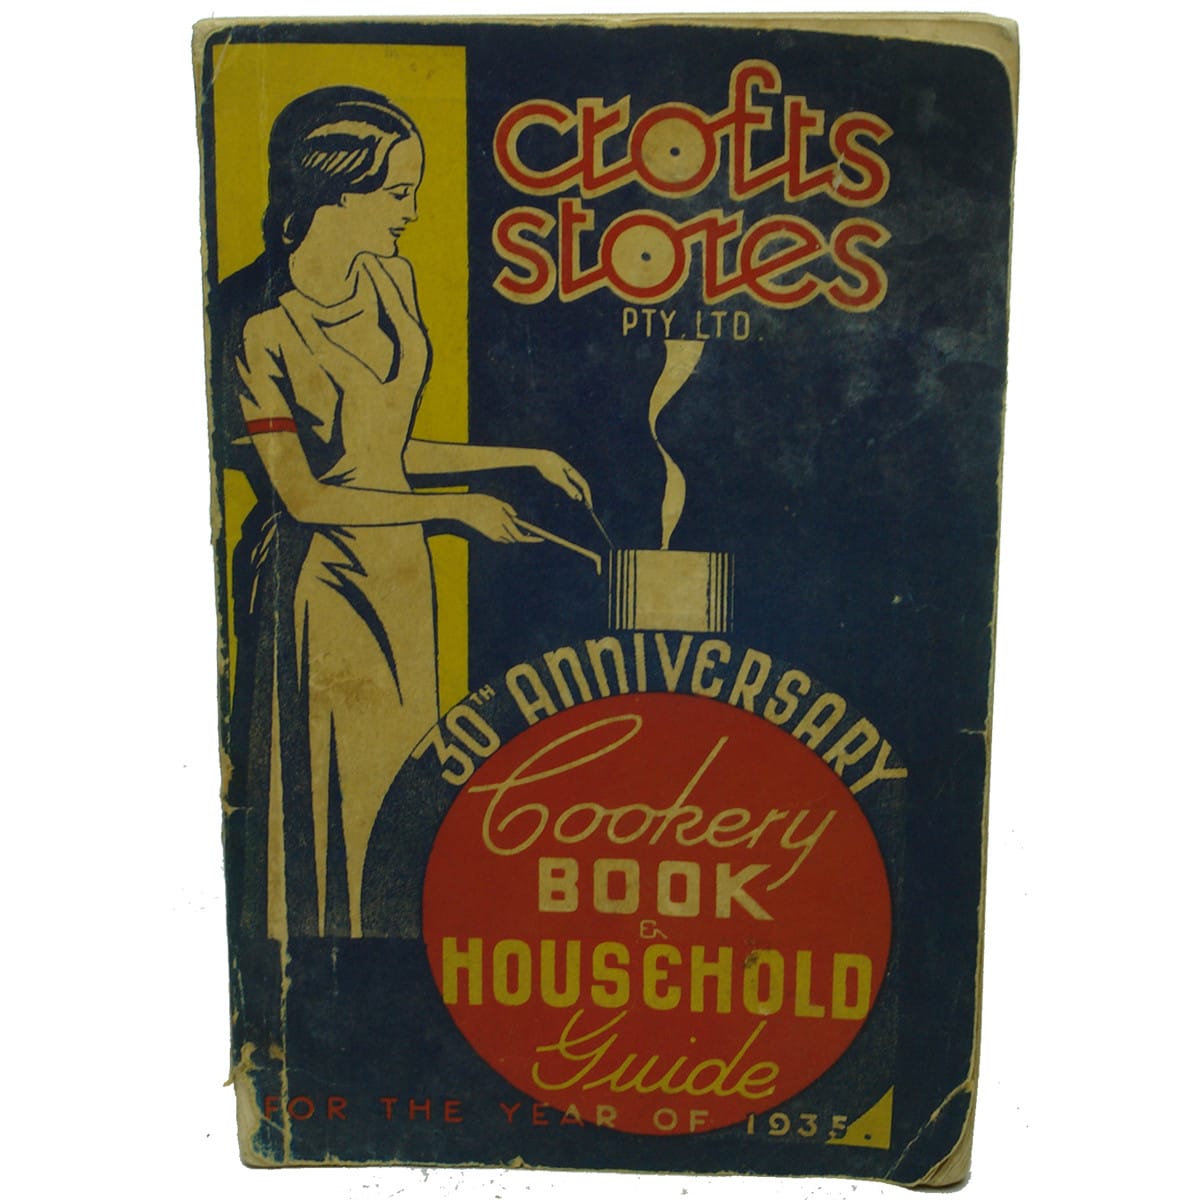 Book. Croft's Stores Pty Ltd 30th Anniversary Cookery Book & Household Guide. 1935. (Victoria)